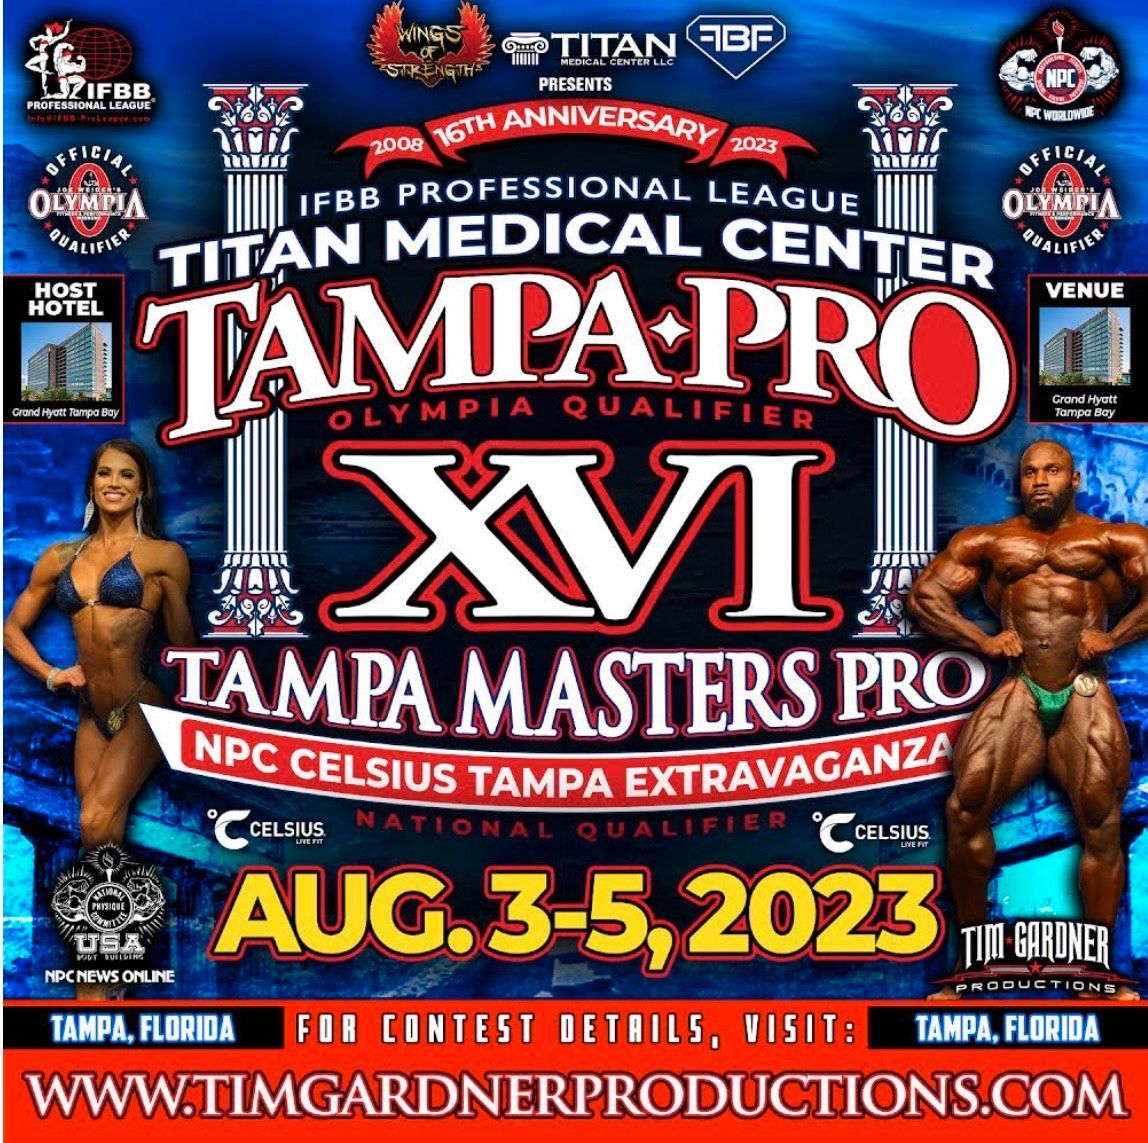 A poster for the tampa pro xvi olympia qualifier